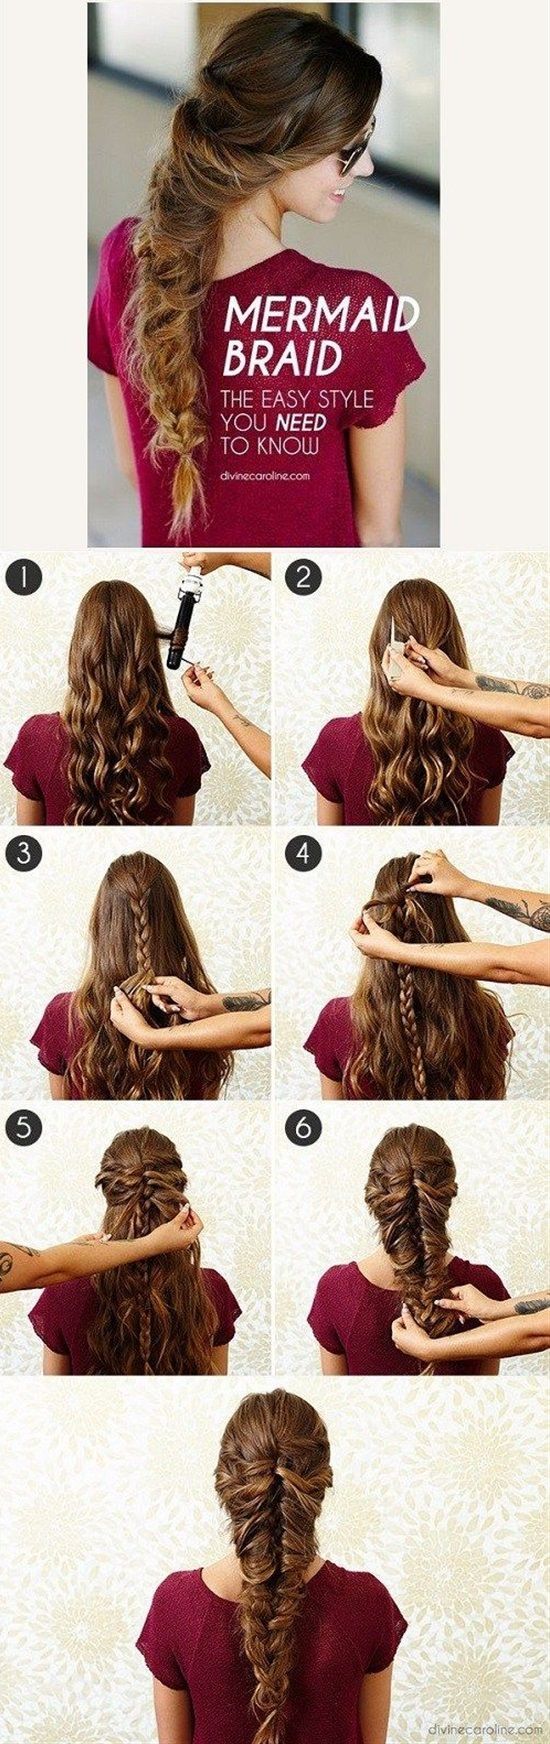 Easy Hair Braiding Models and Structures